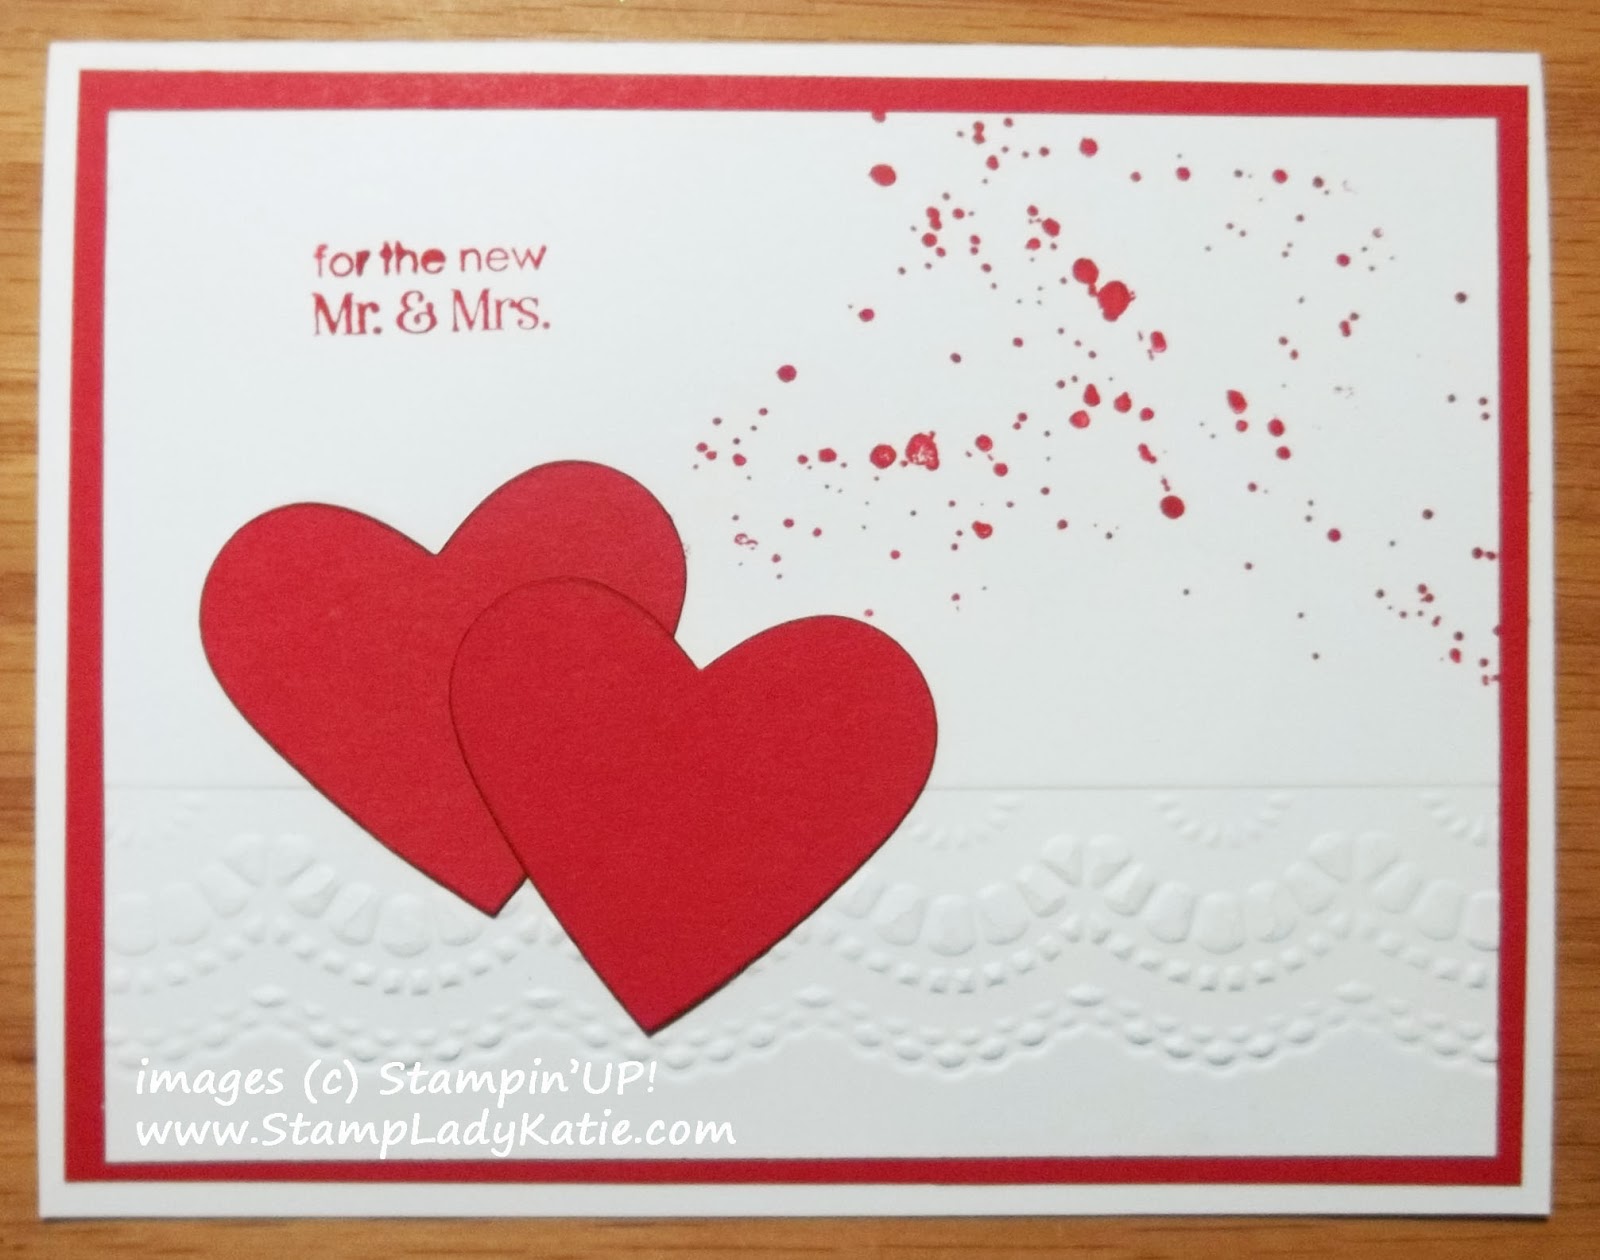 Valentine Card or Wedding Card with texture embossing using Stampin'UP!'s Delicate Designs Embossing Folders